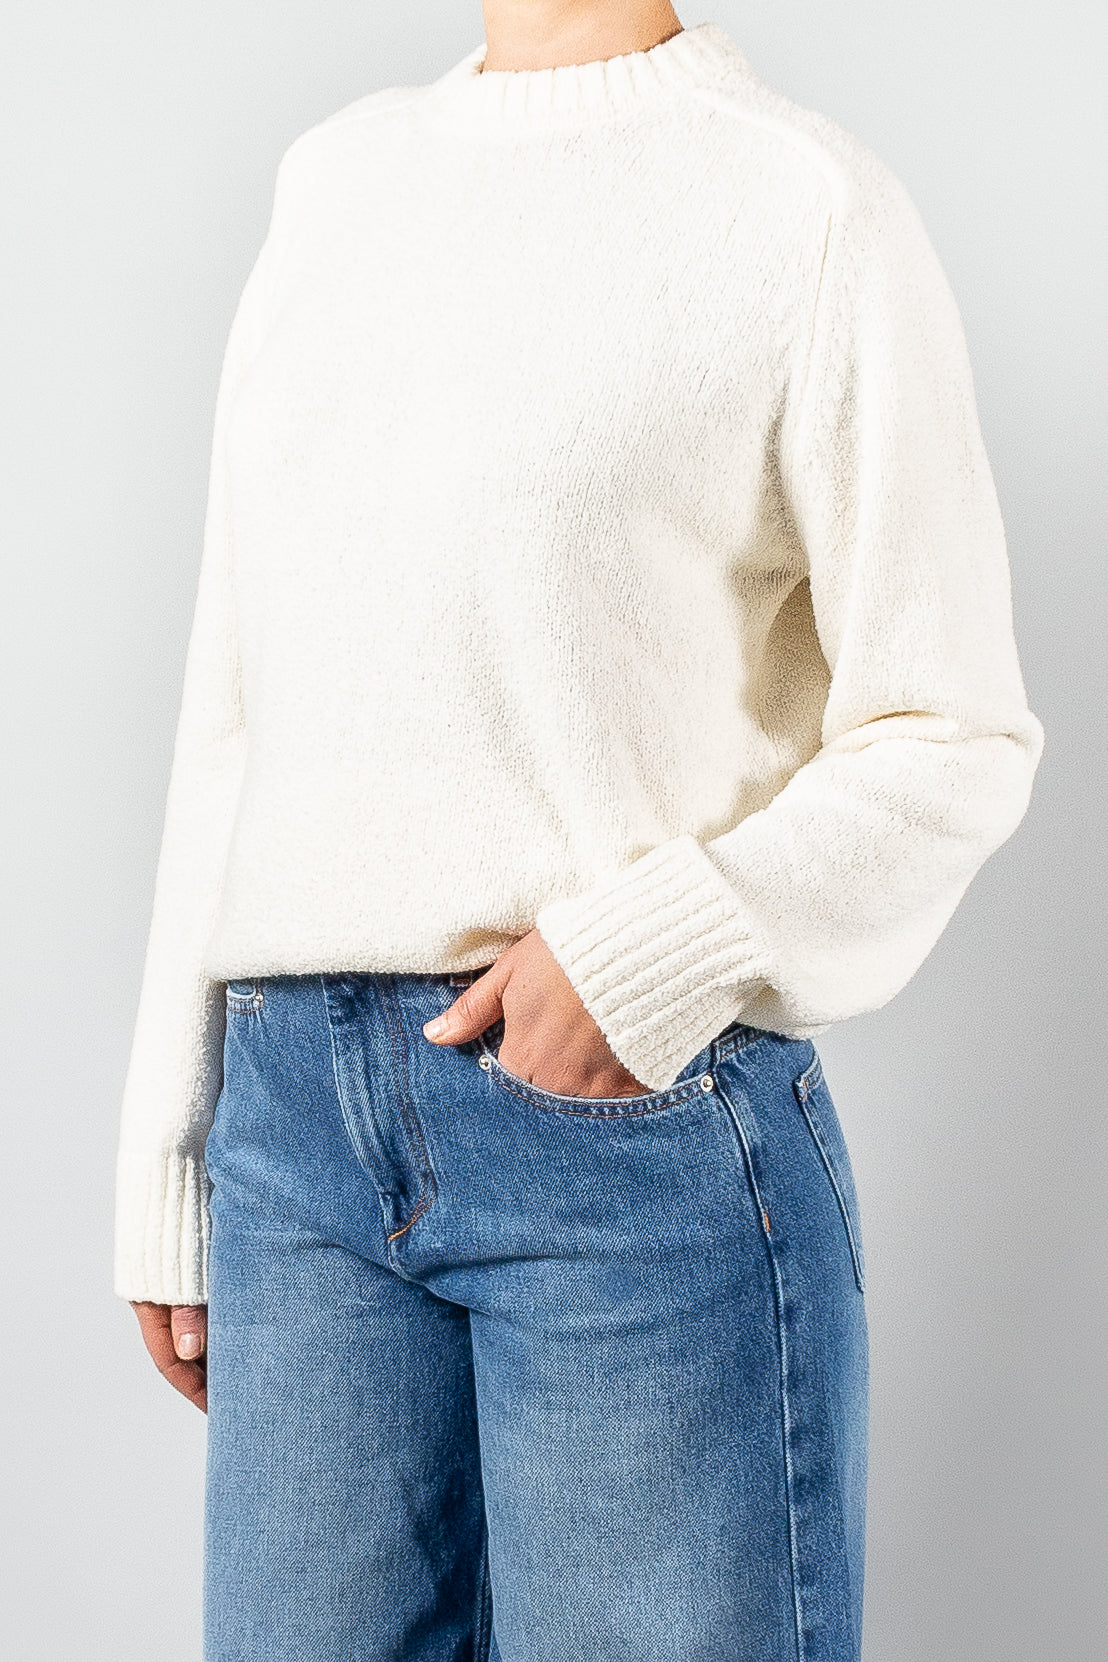 Loulou Studio Canillo Sweater-Knitwear-Misch-Boutique-Vancouver-Canada-misch.ca